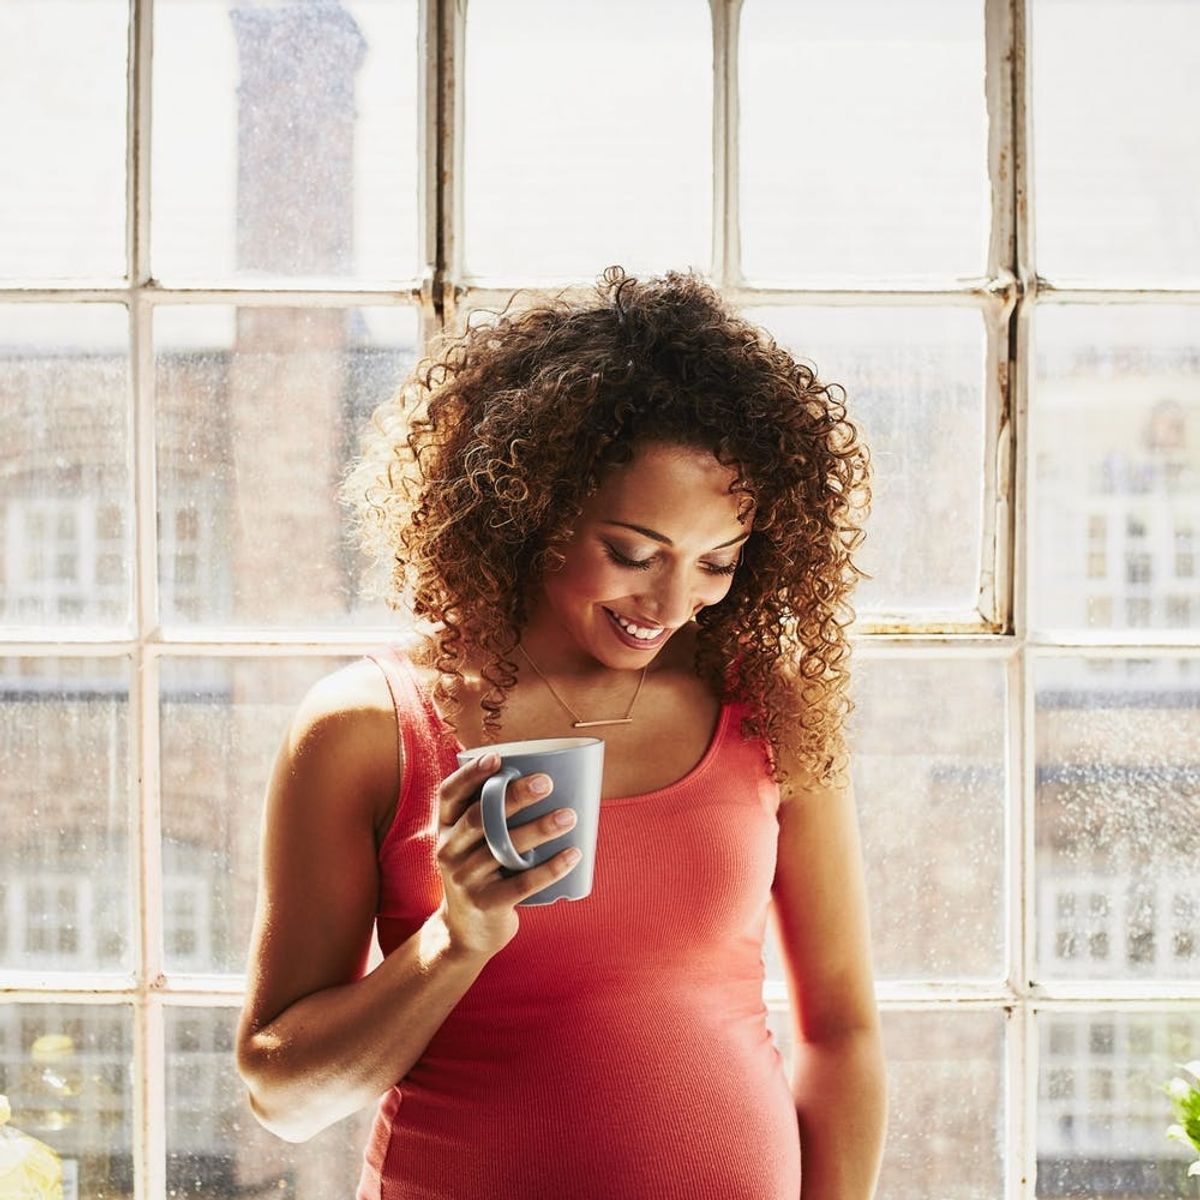 5 Weird Ways Your Body Changes During Pregnancy That No One Tells You About